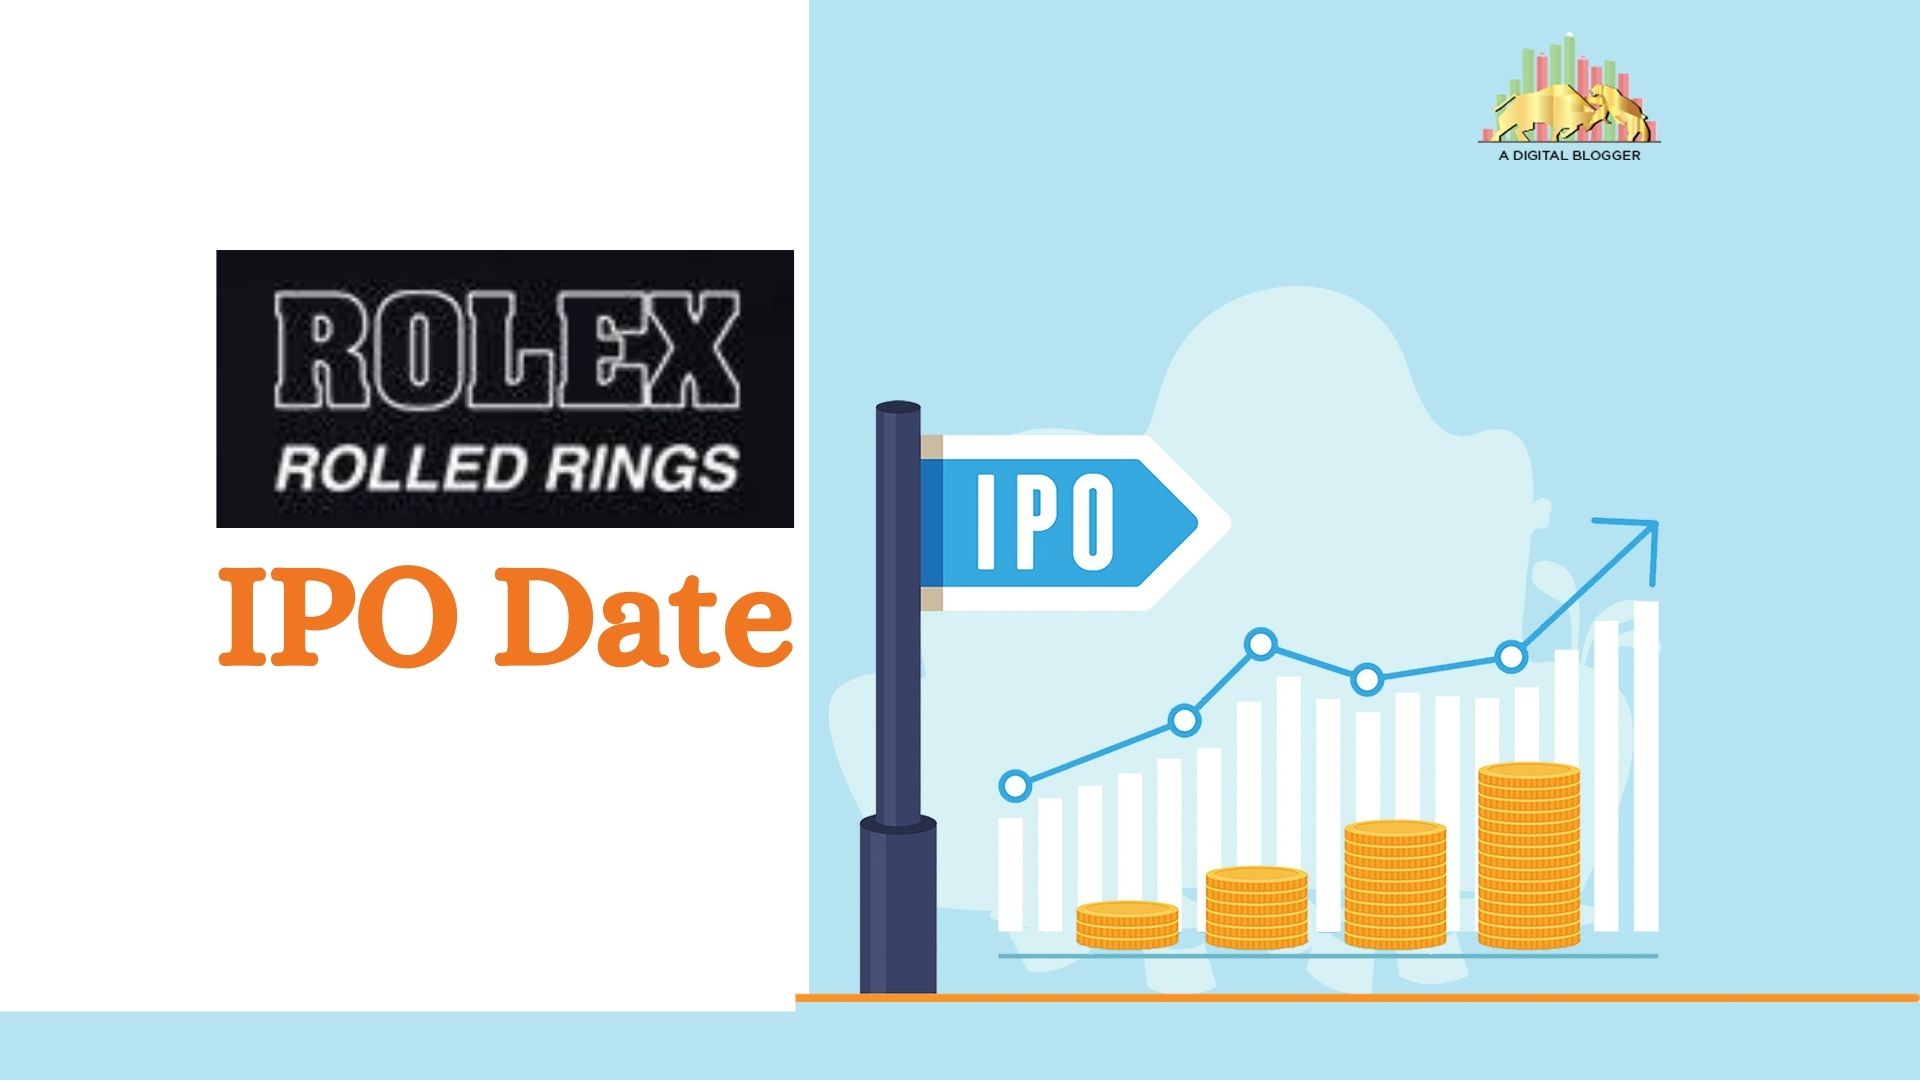 Is Rolex Rings IPO better compared to Glemark Lifesciences IPO? - Quora